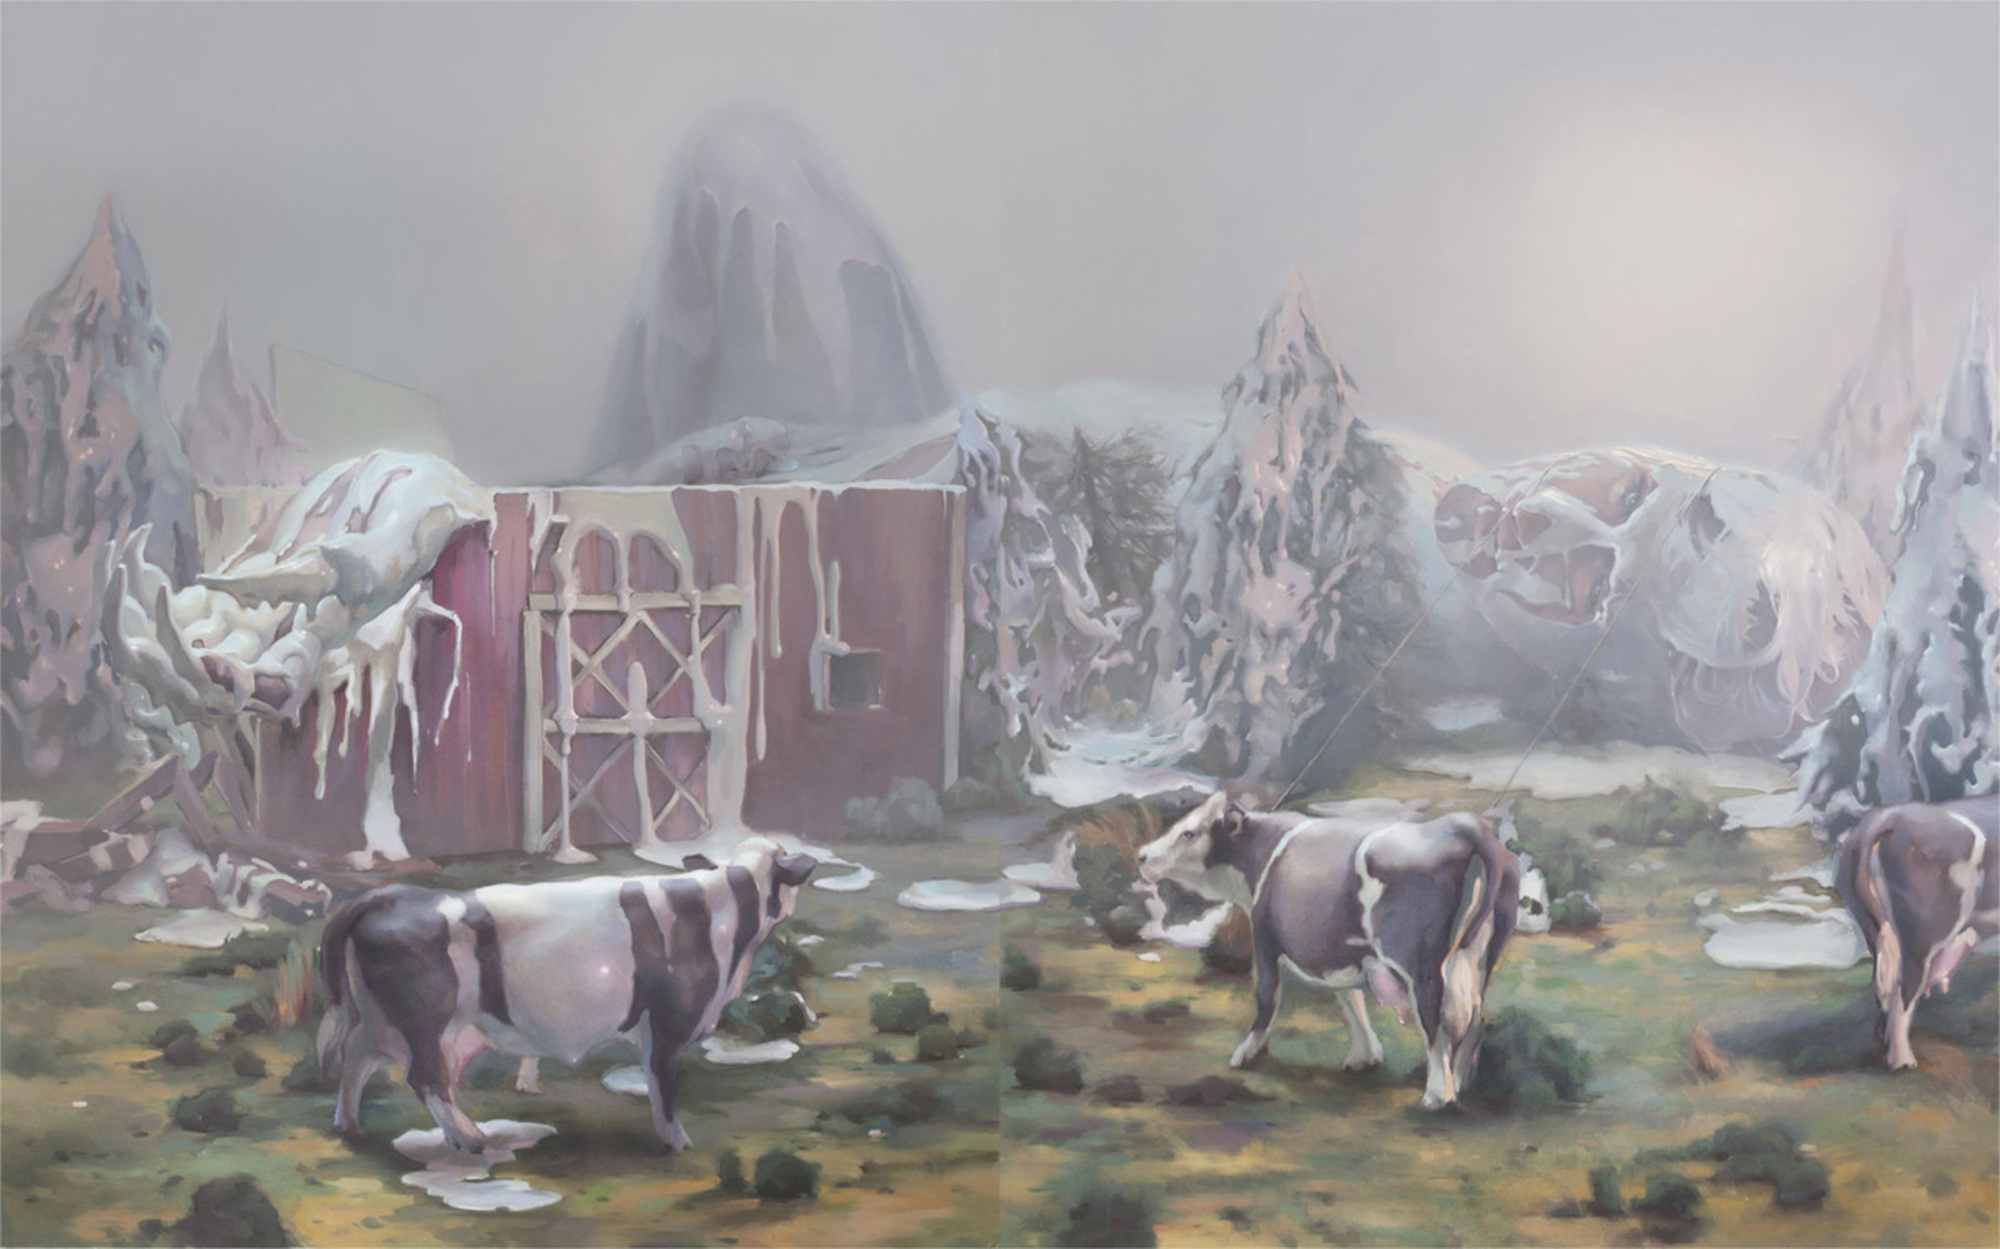 Ivan Alifan, Not Milk, surreal landscape with body in background